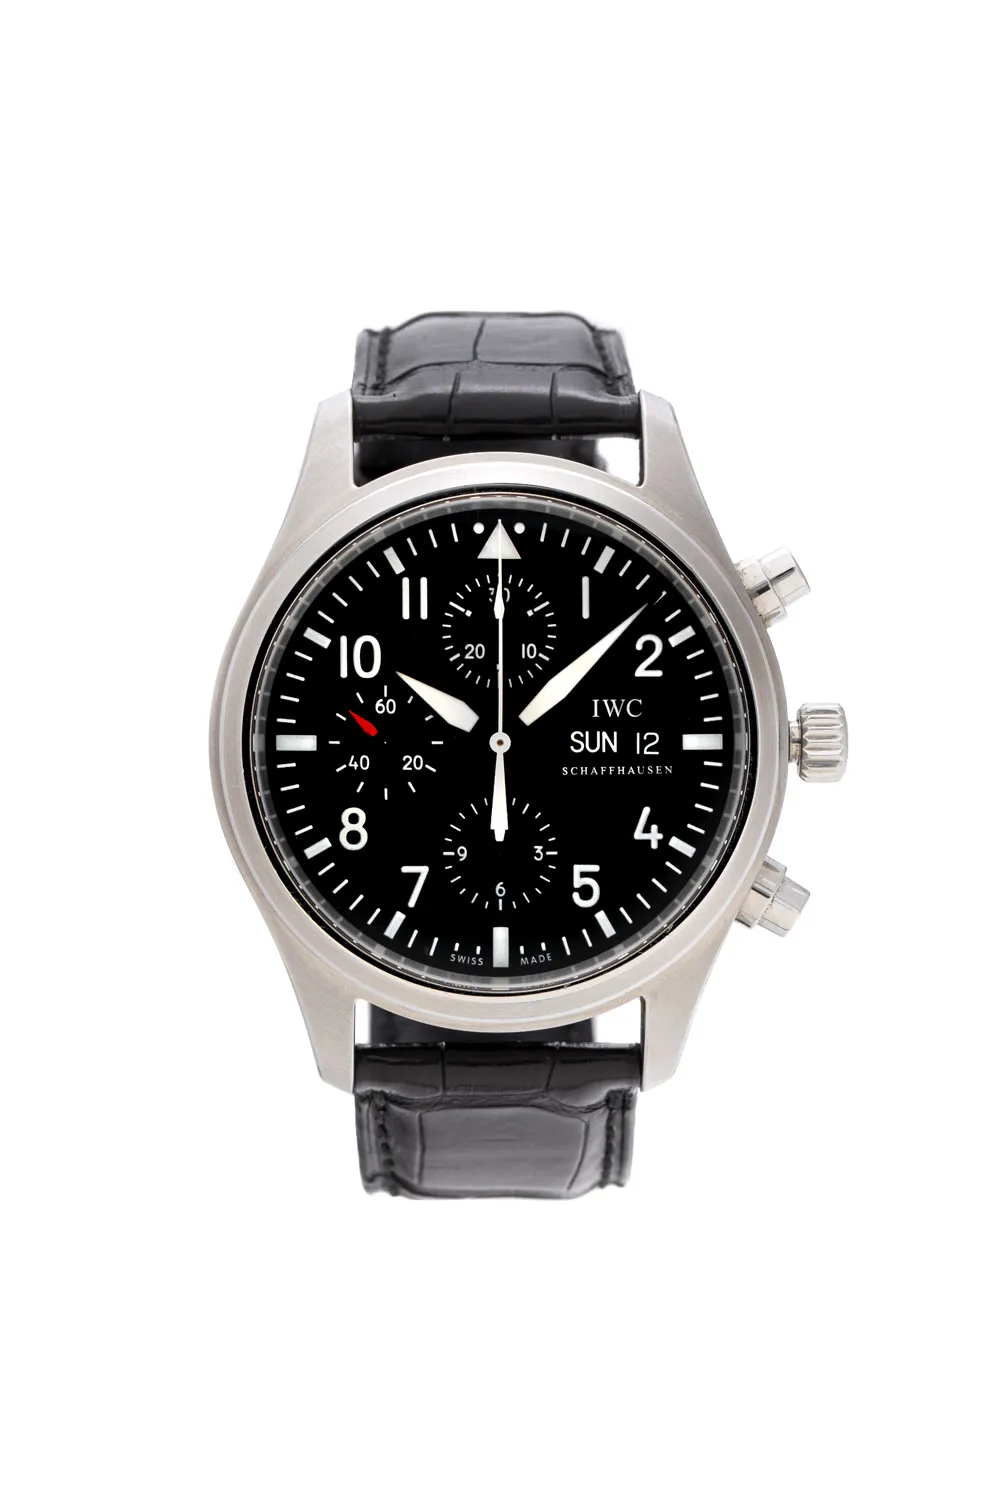 IWC Pilot 371701 42mm Stainless steel